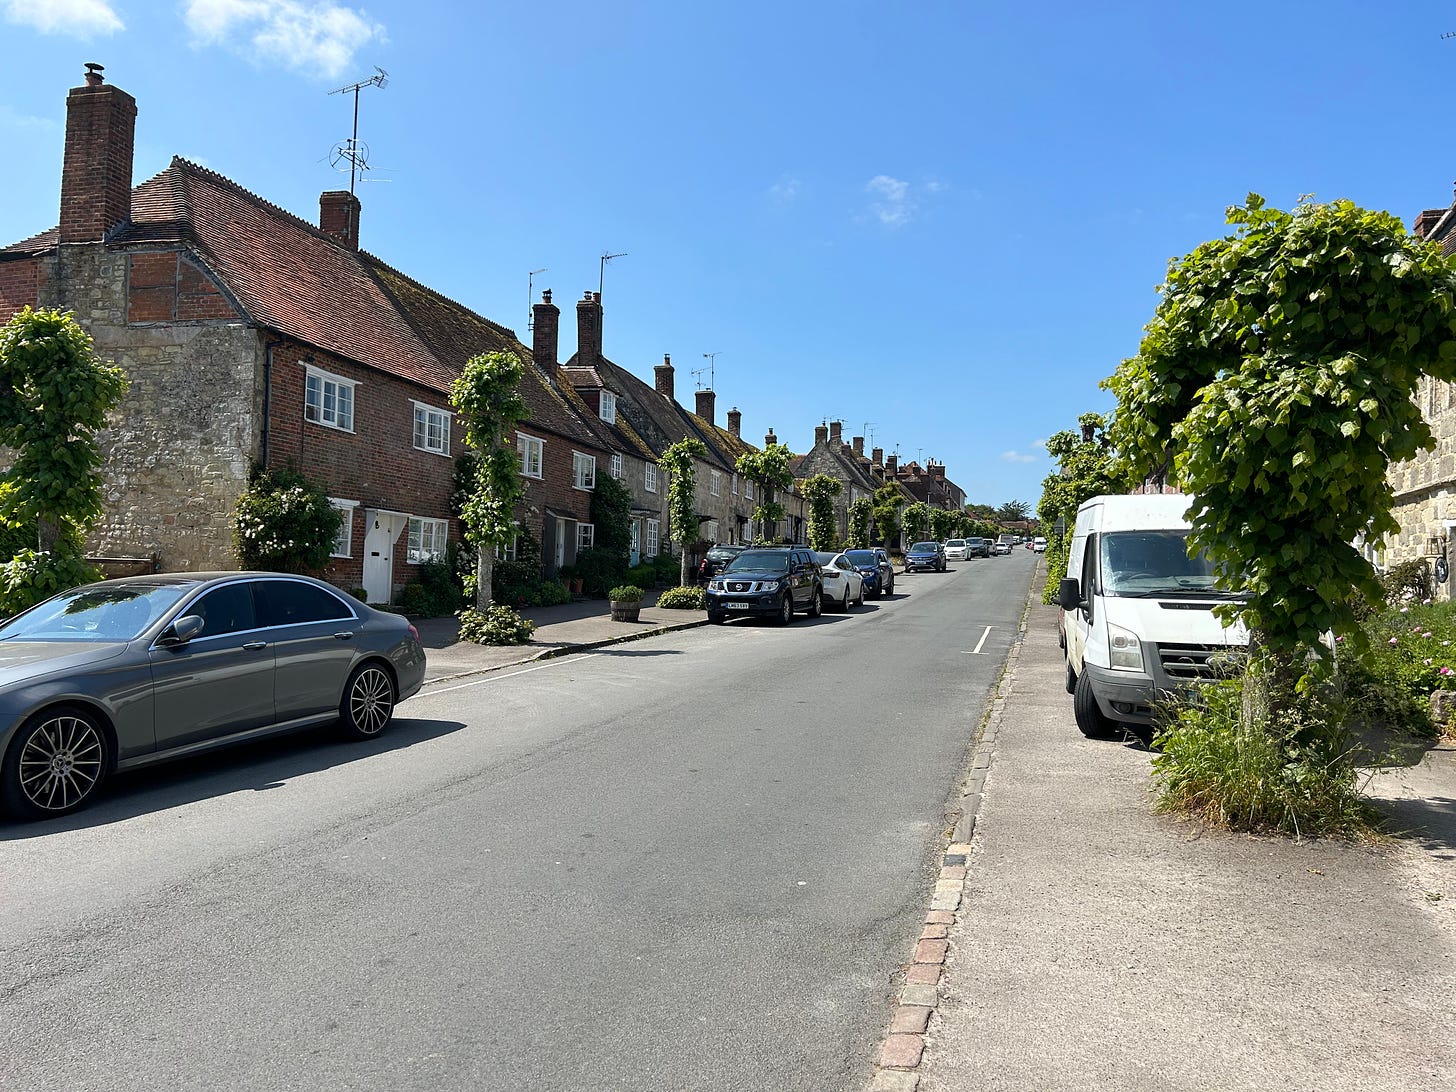 Hindon, Wiltshire. This is the High Street, which is tree lined. The street is on a hillside and has a charming feel to it. On each side are old cottages. Image: Roland's Travels